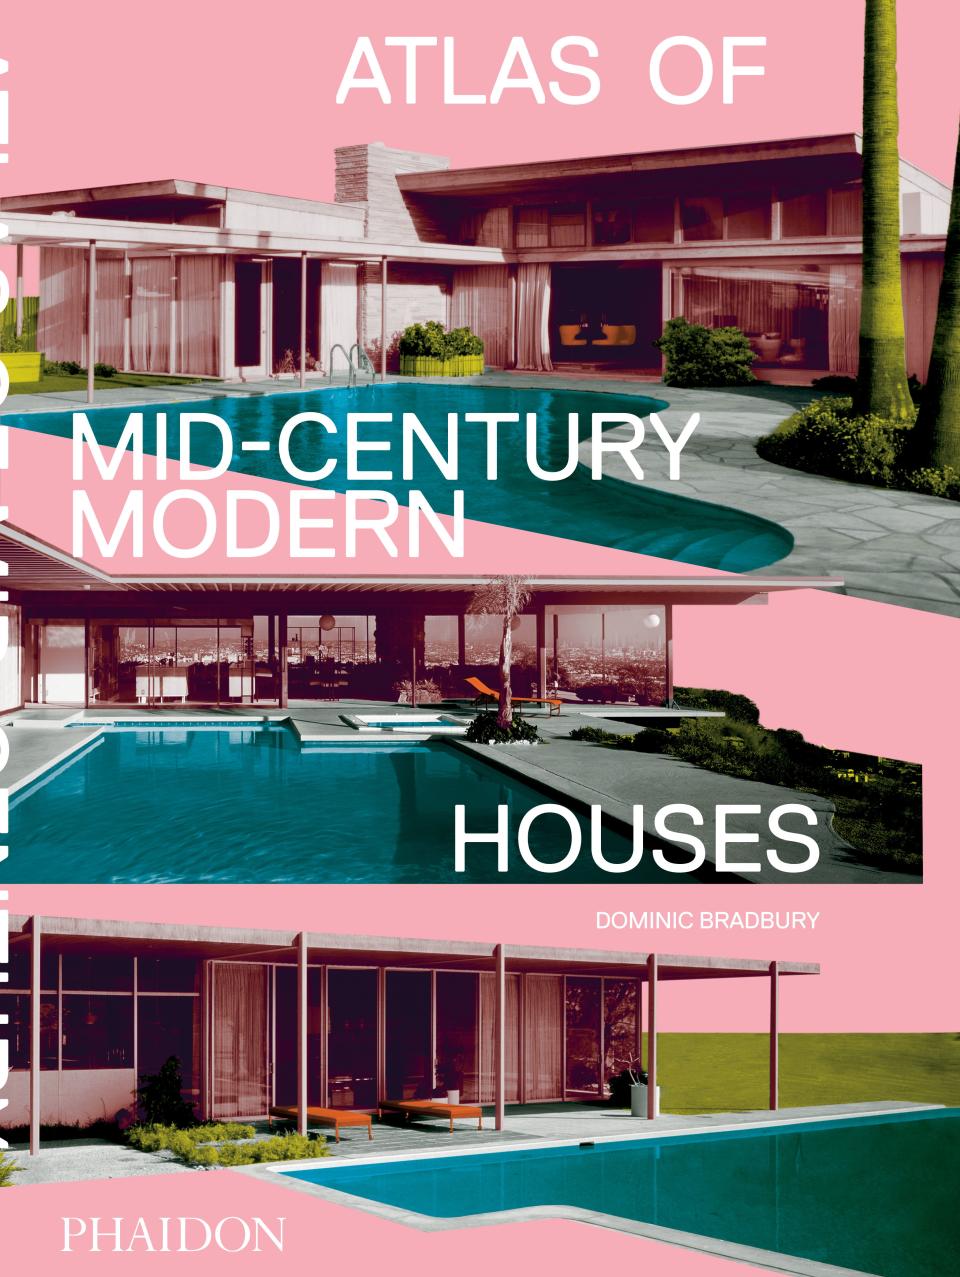 Atlas of Mid-Century Modern Houses by Dominic Bradbury, published by Phaidon.